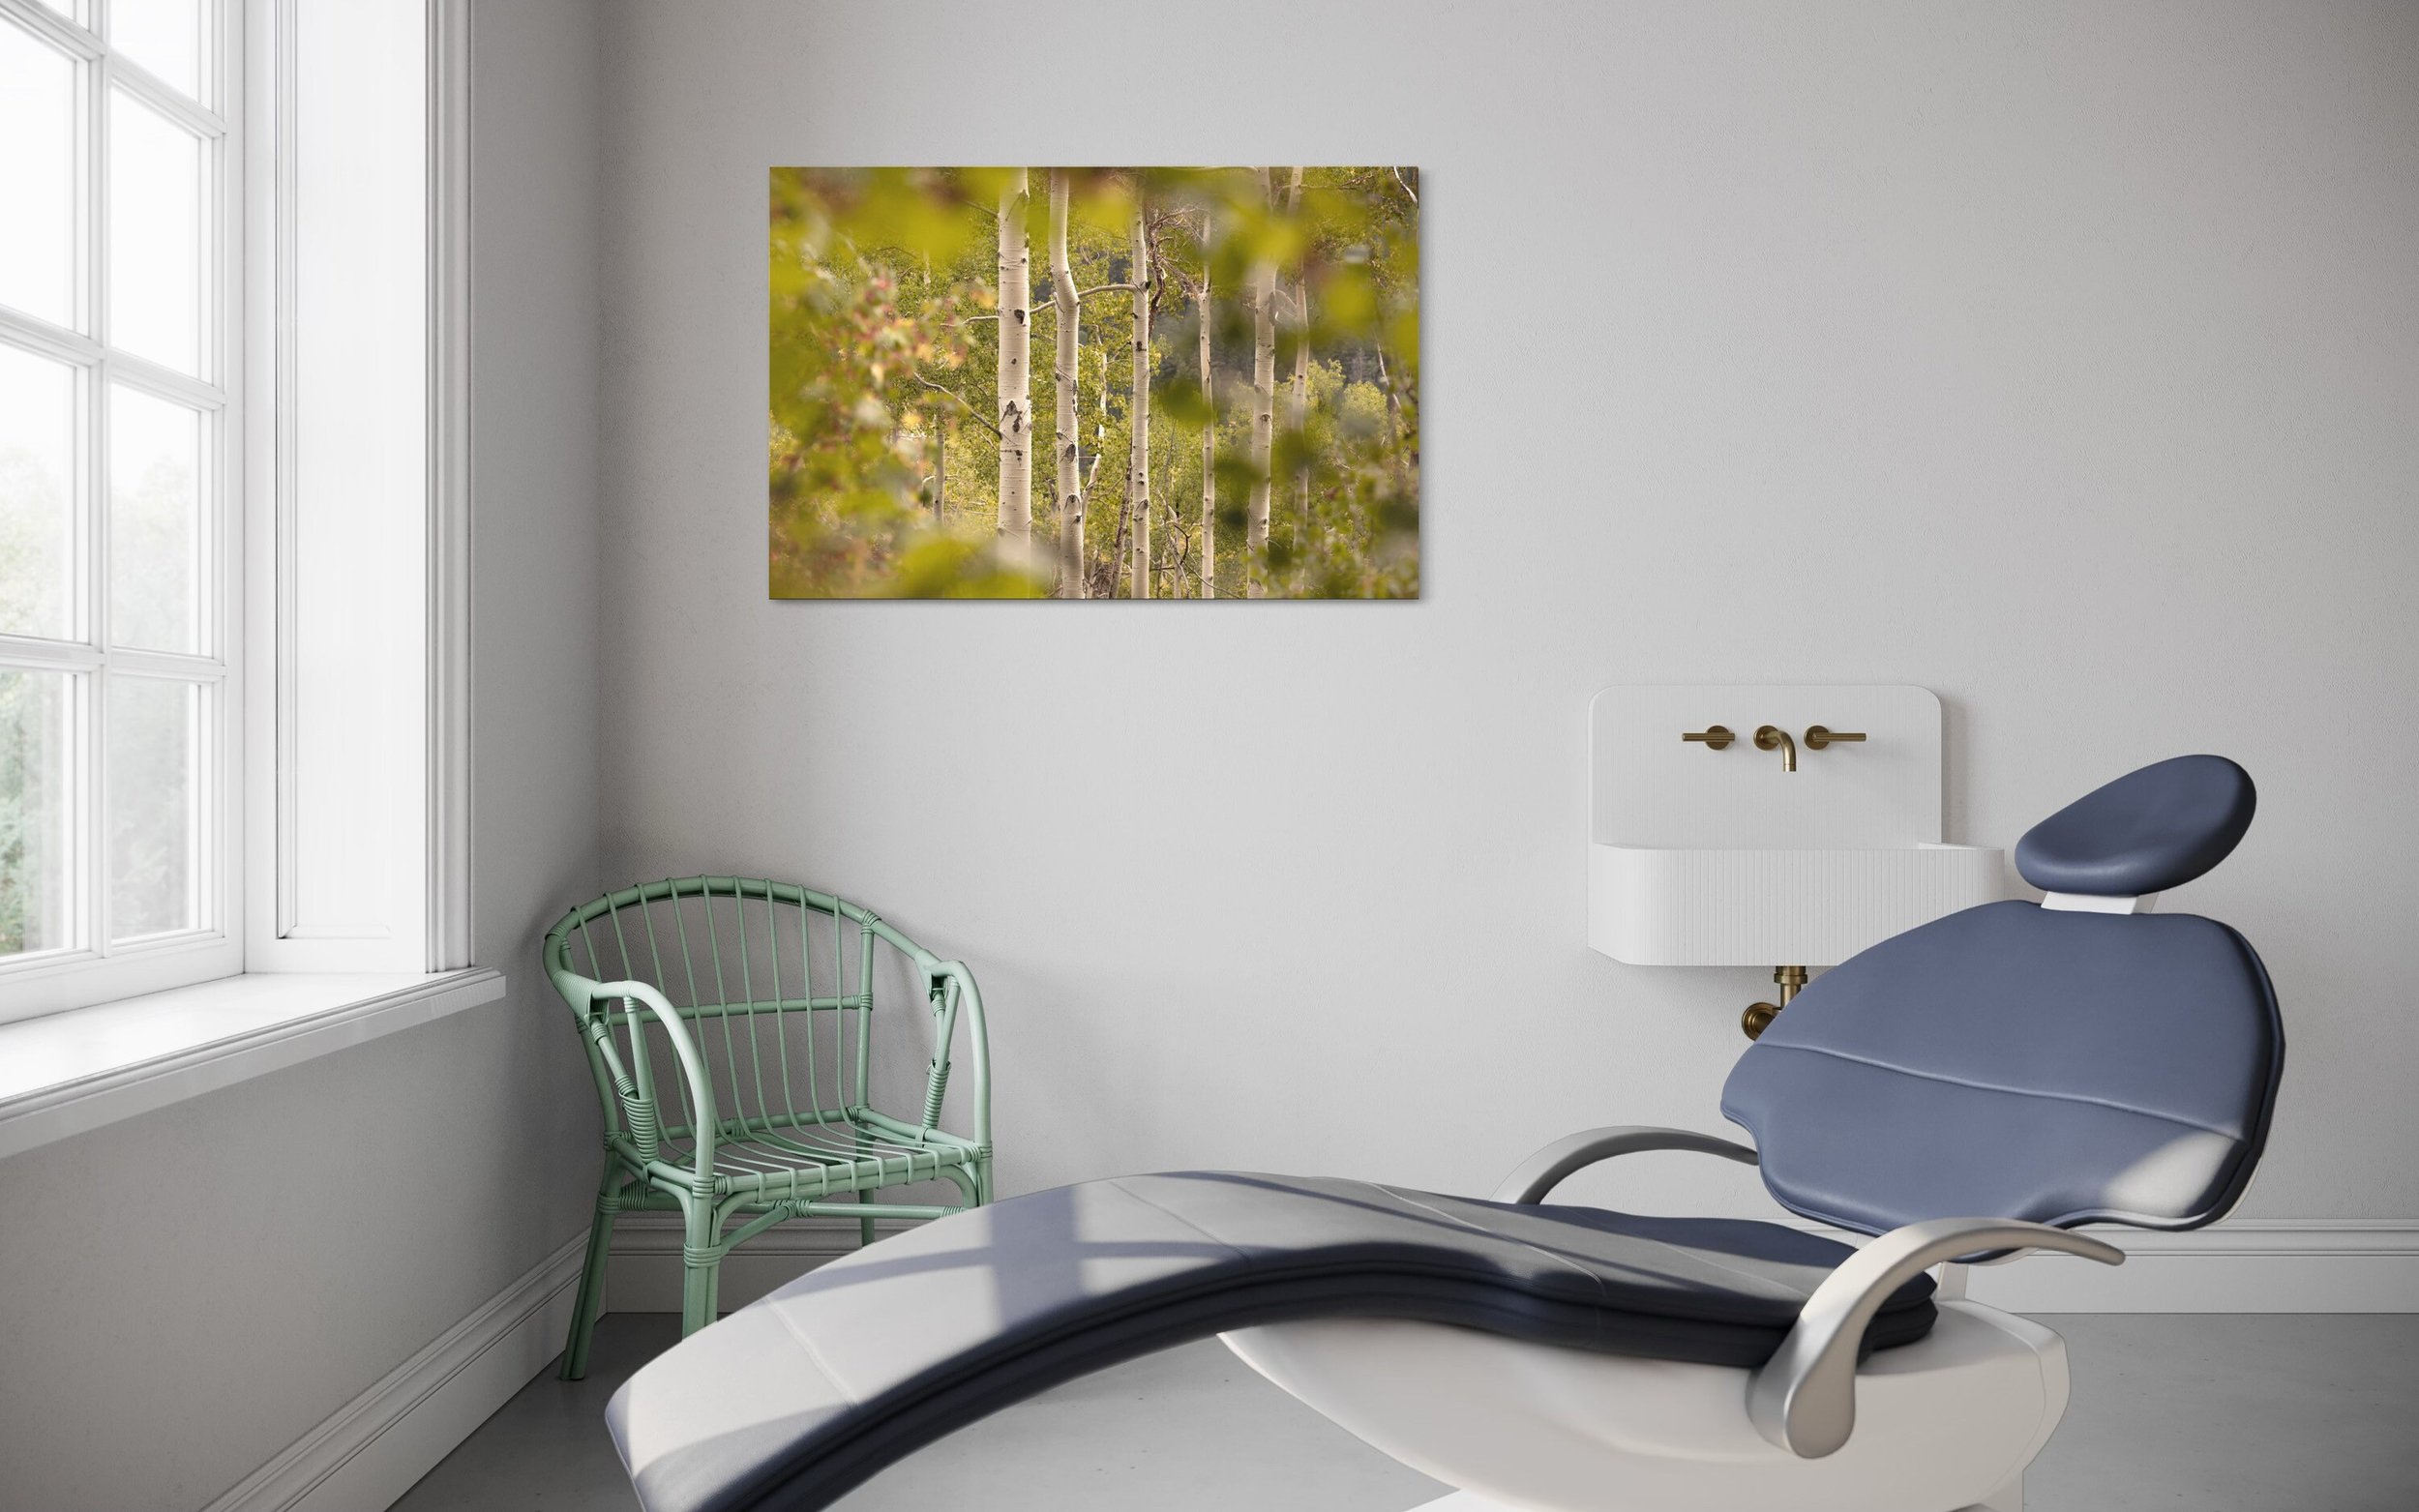 Aspen Trees | Colorado Photography Nature Wall Art Canvas Prints Metal Landscape Home and Office Decor